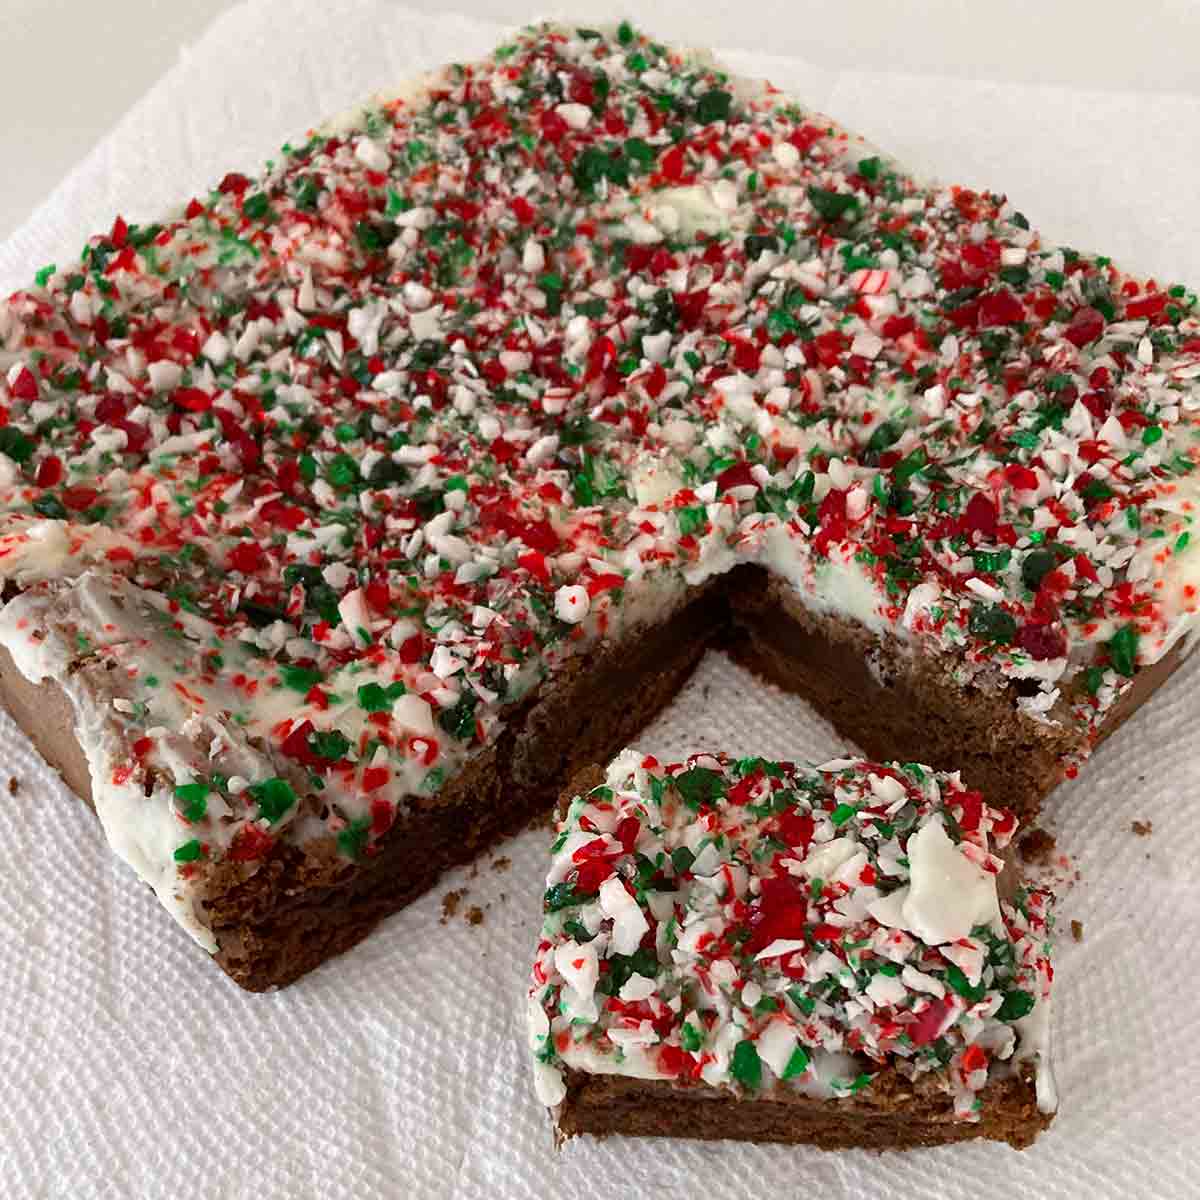 A batch of brownies topped with white frosting and crushed peppermint candies.